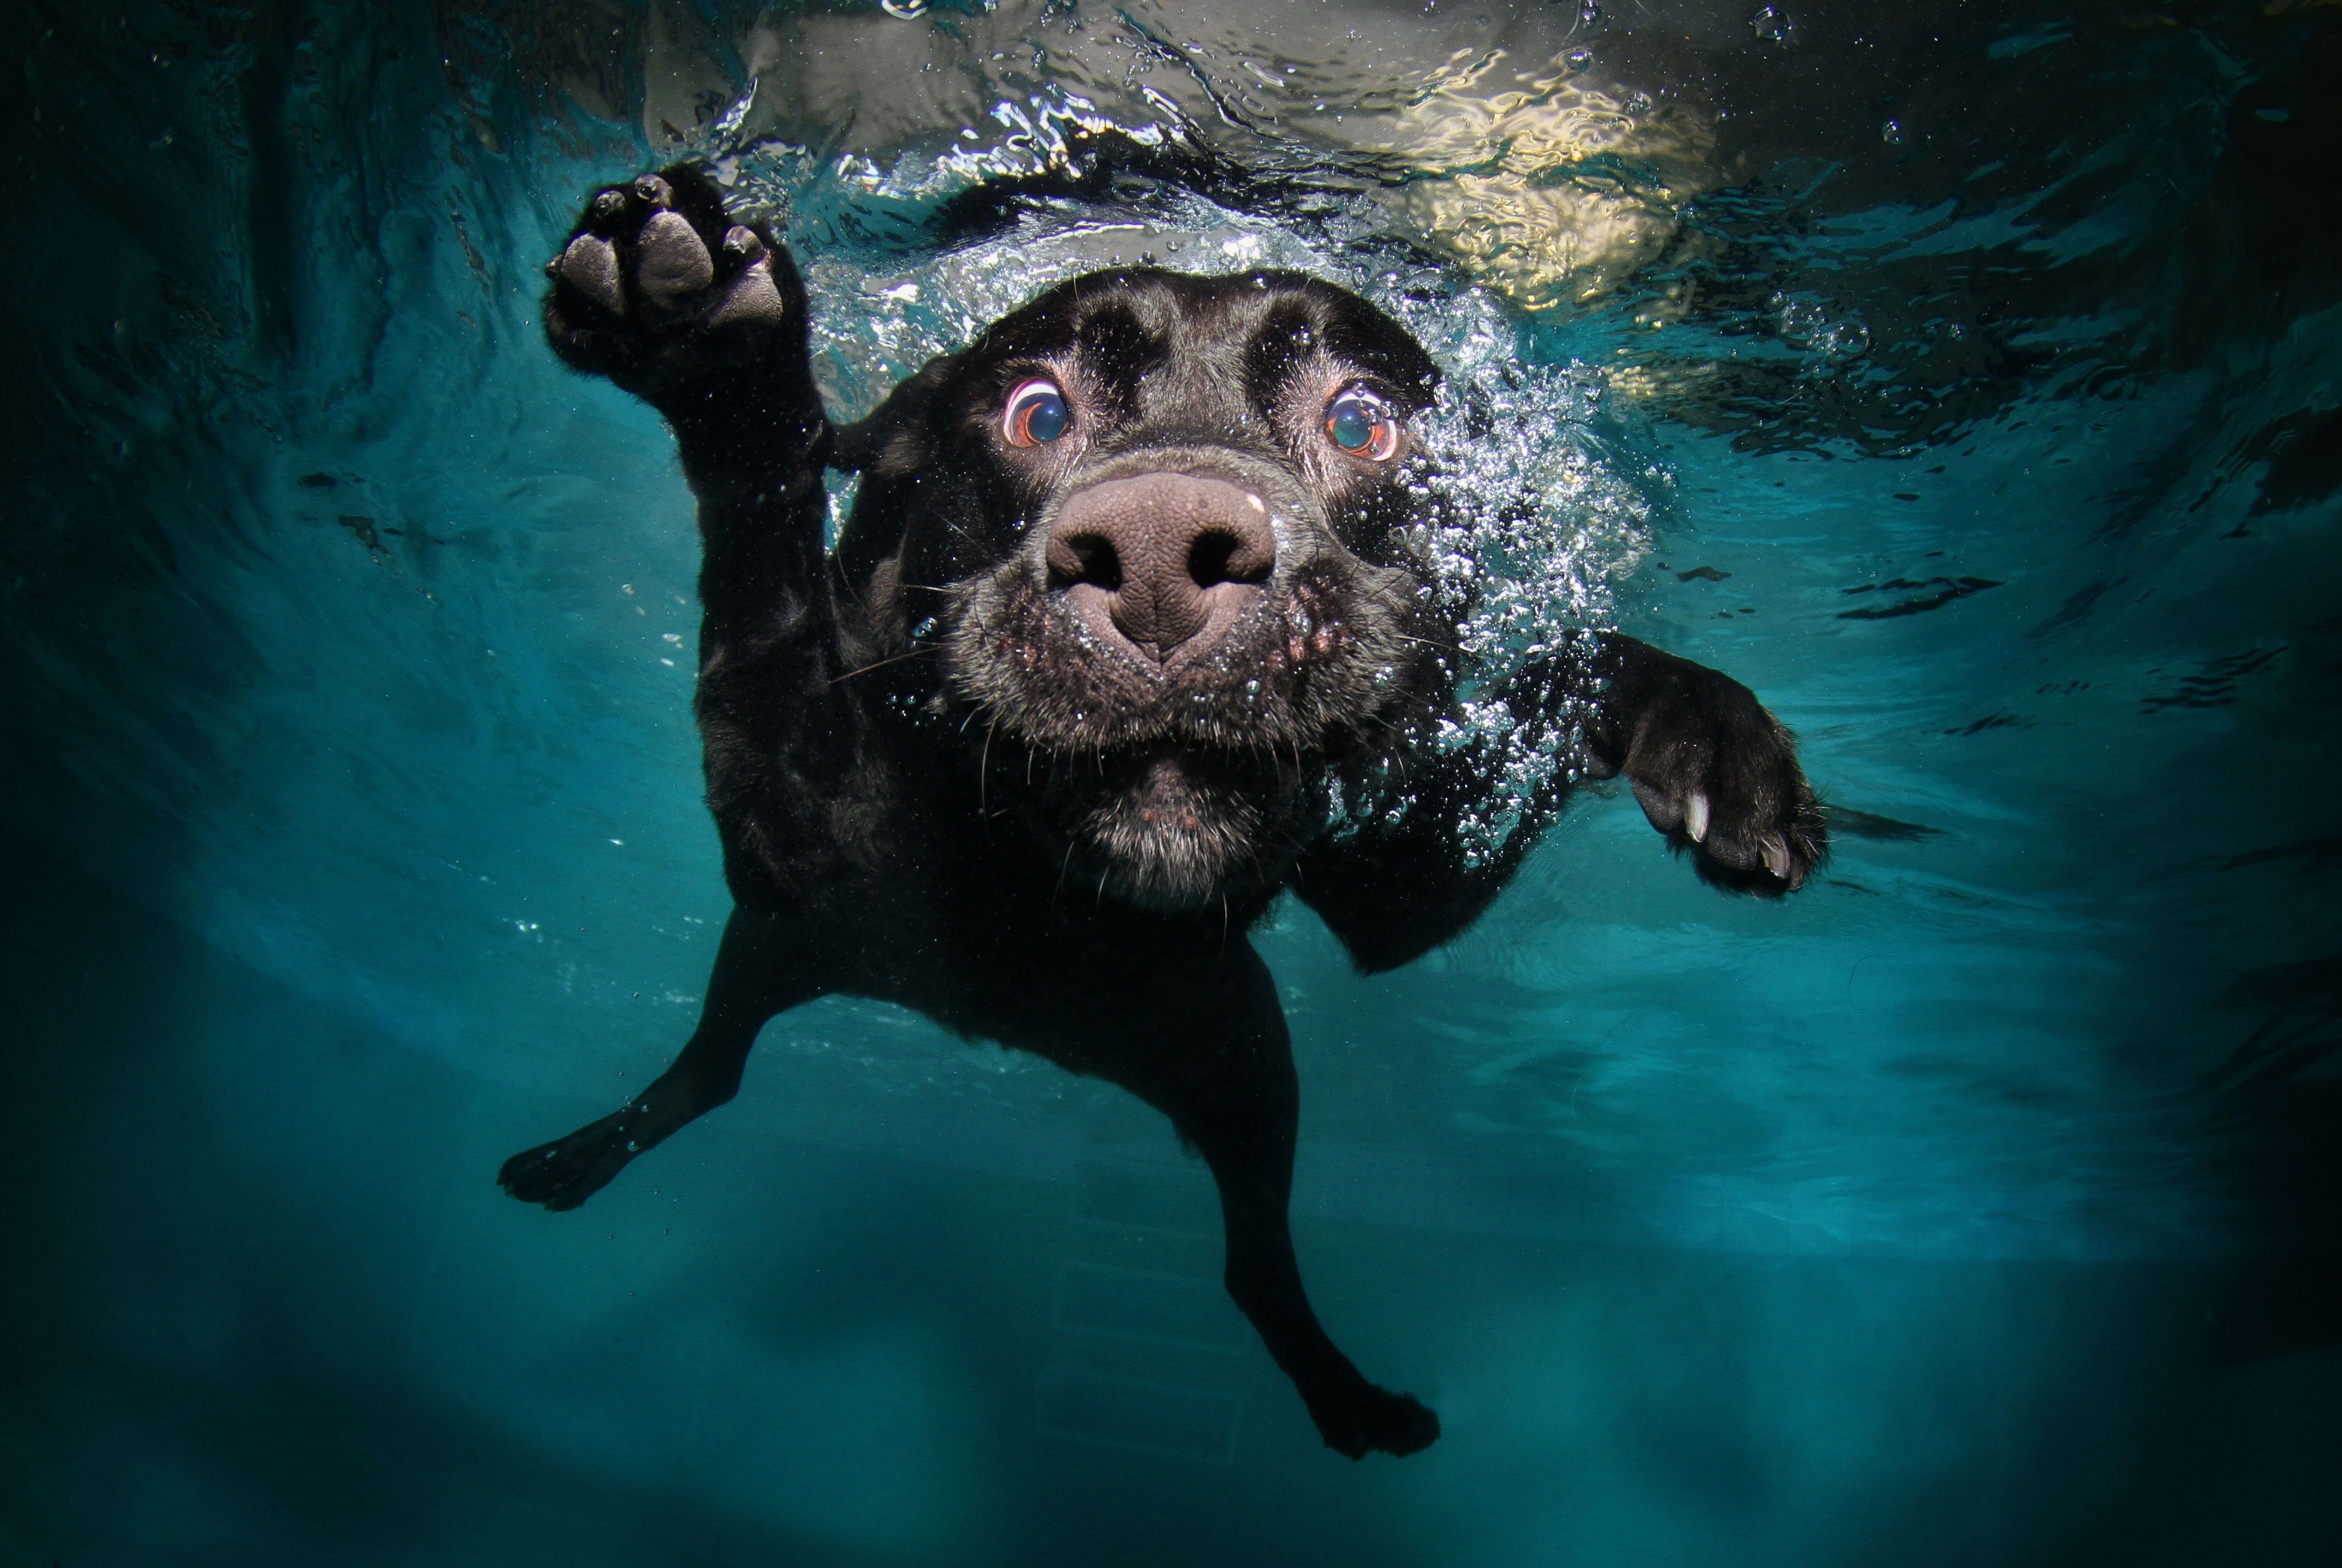 A black dog swimming in a pool - Underwater, dog